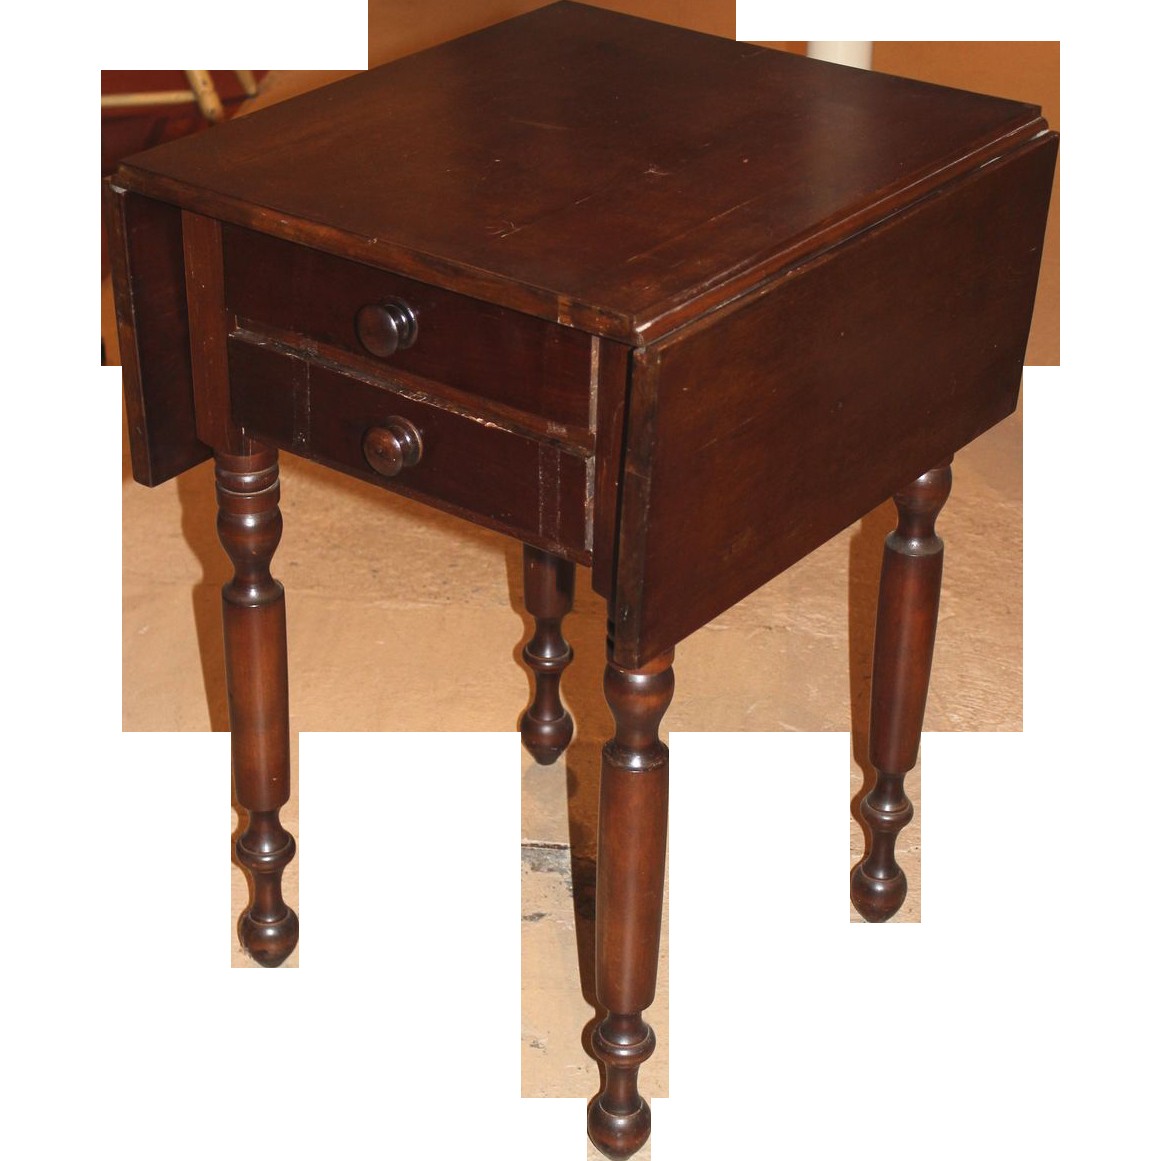 19th c mahogany two drawer drop leaf work table from